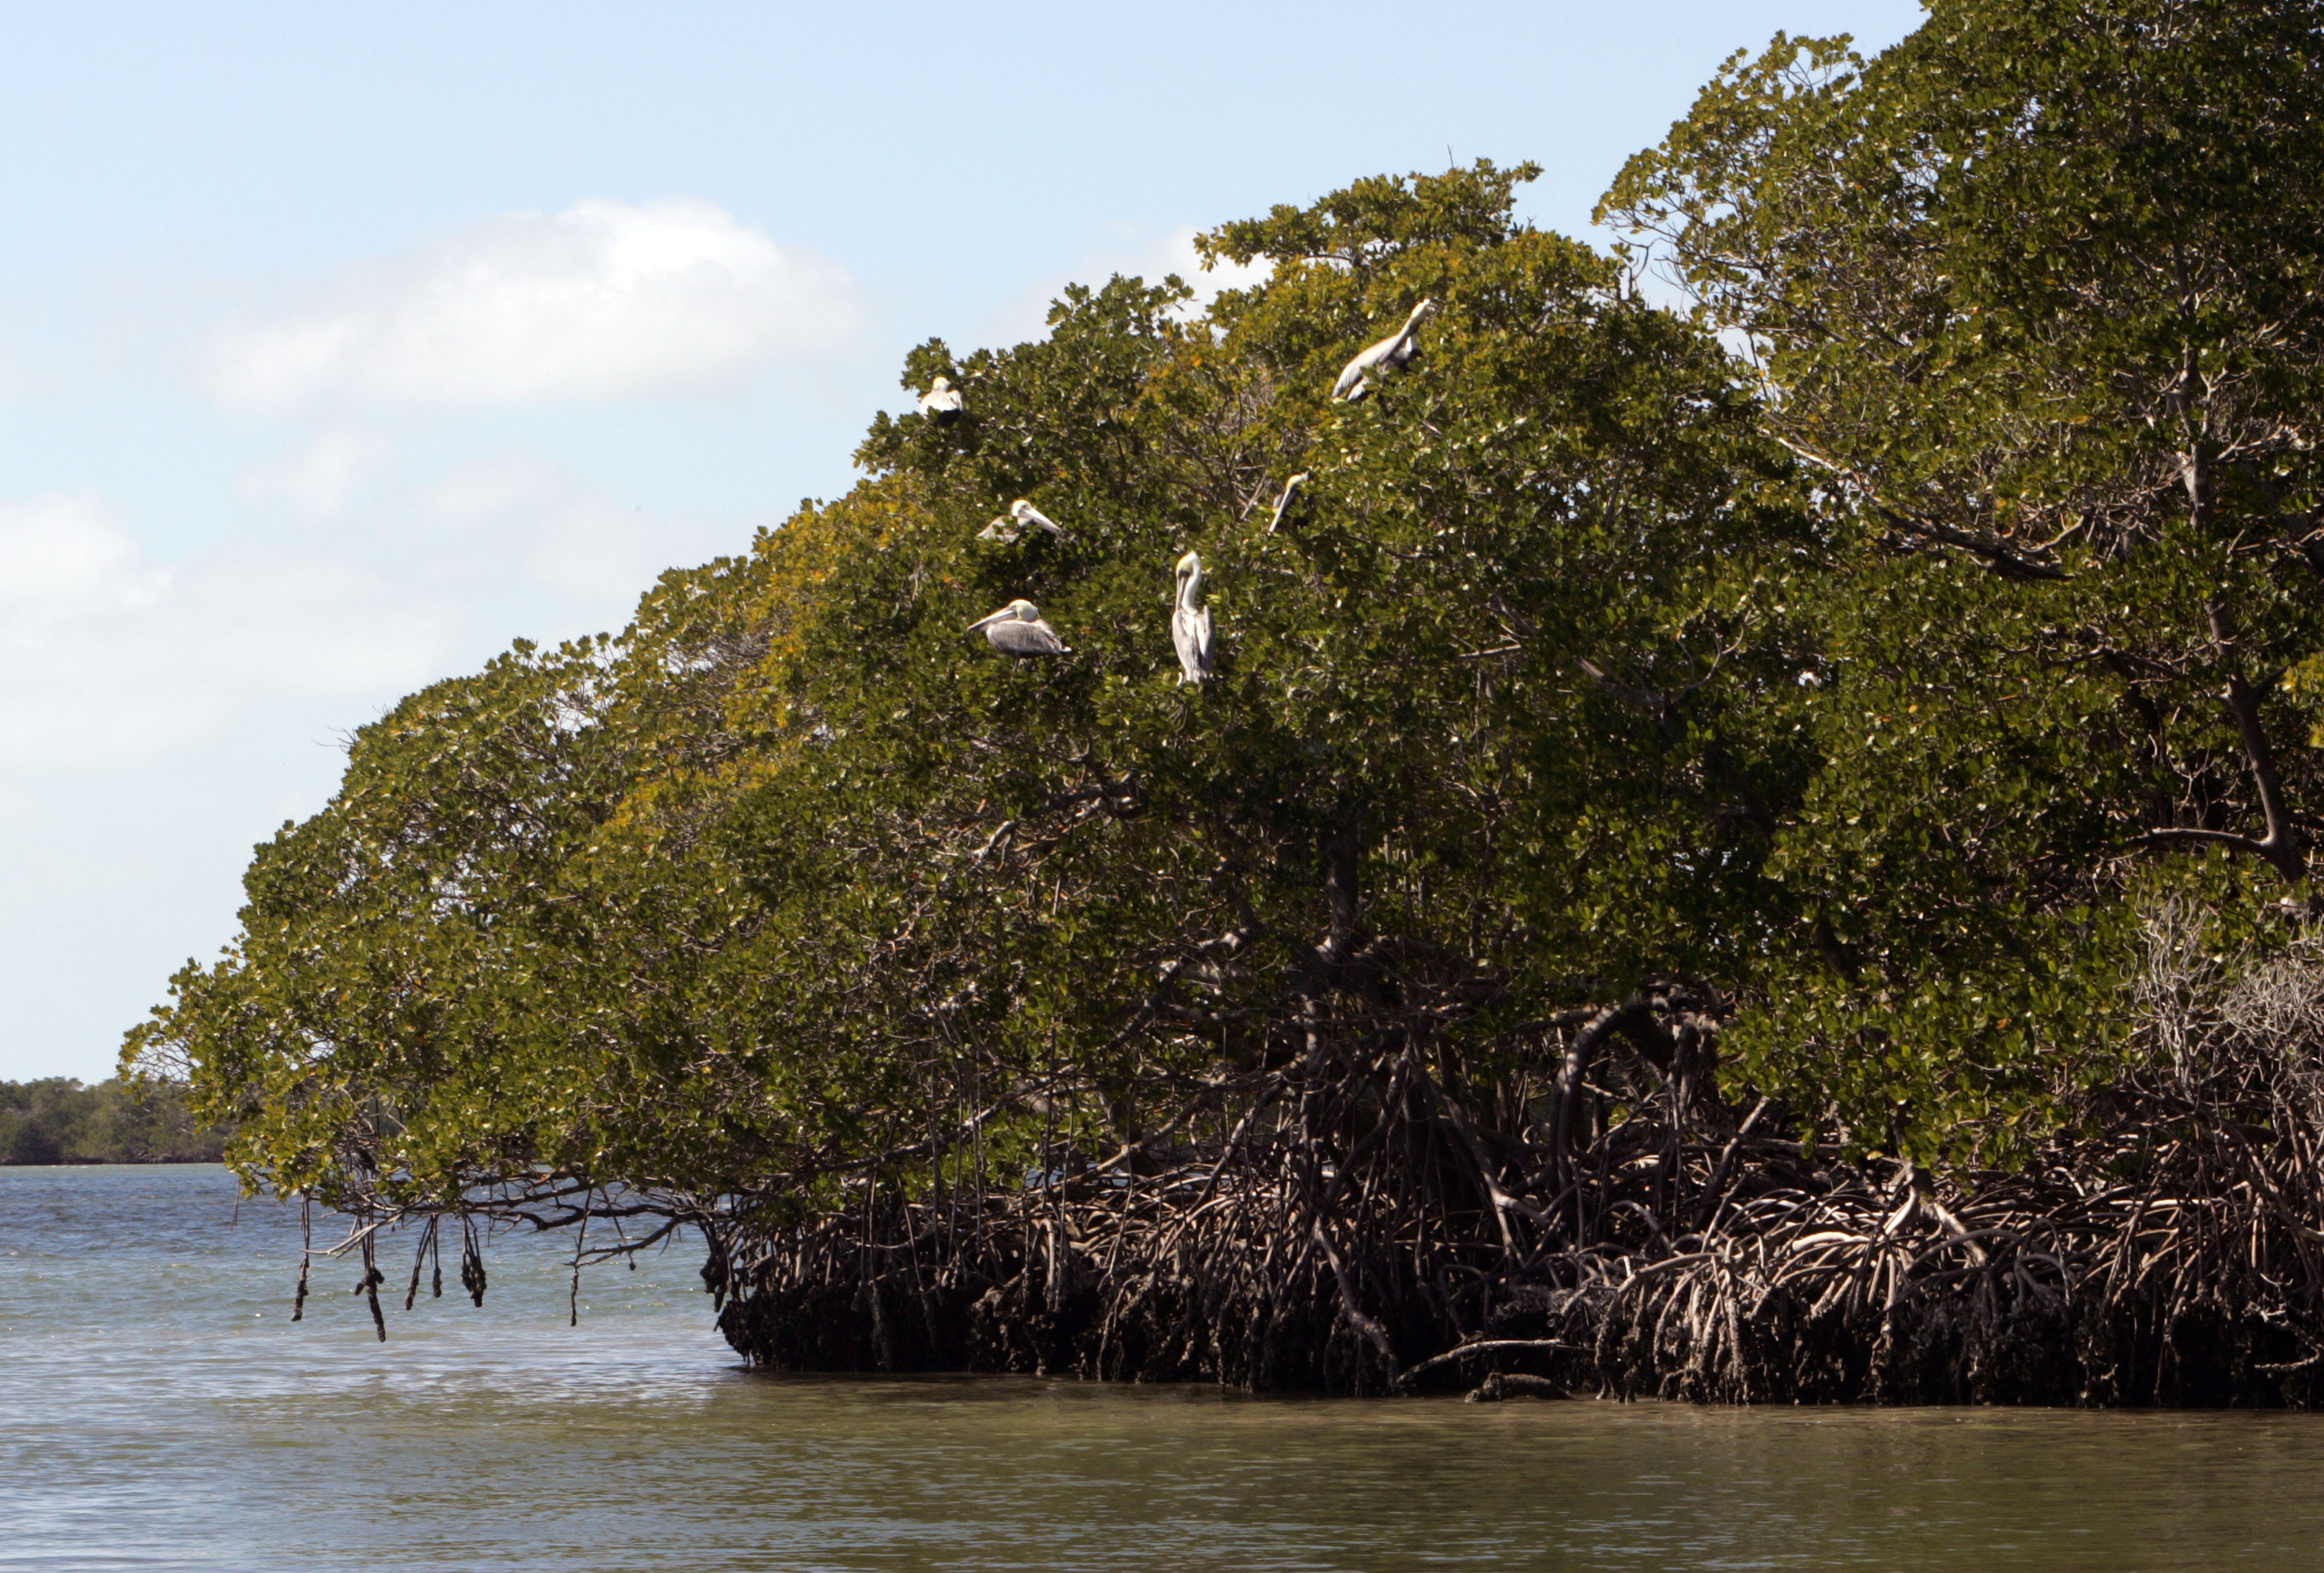 three large birds sit in a tree overhanging a body of water